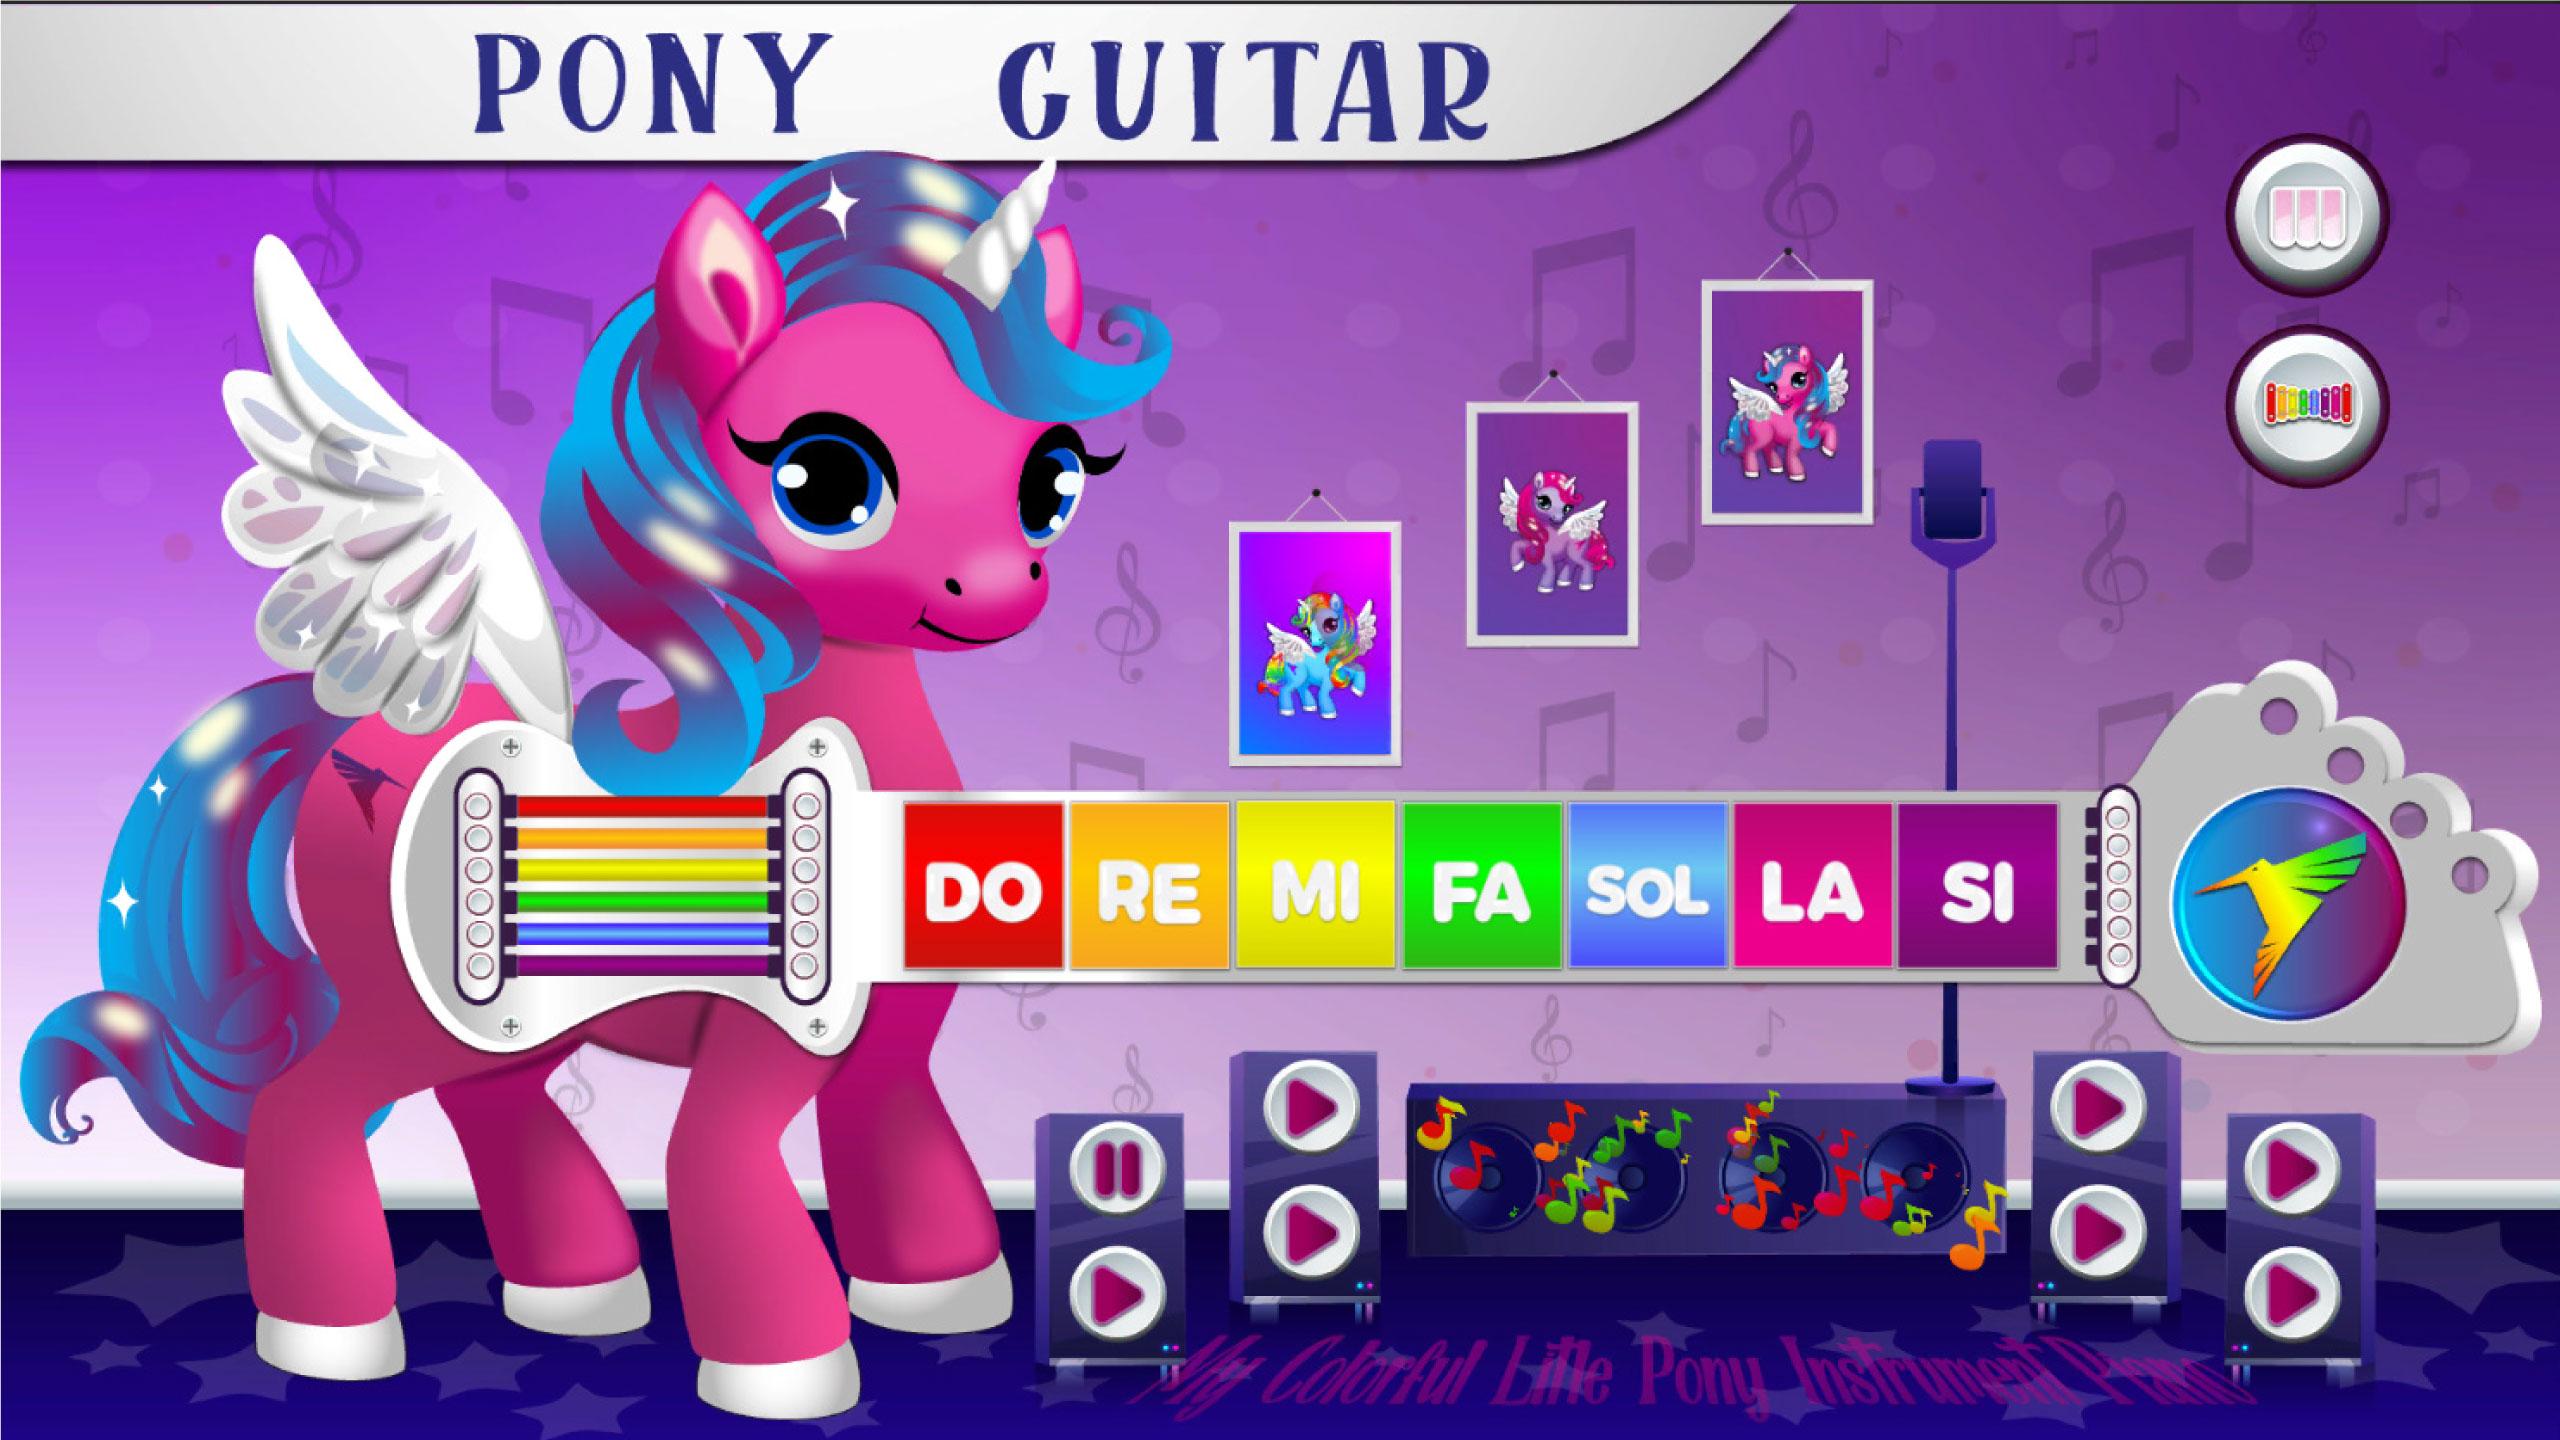 My Colorful Litle Pony Instrument - Piano 2.0 Screenshot 22